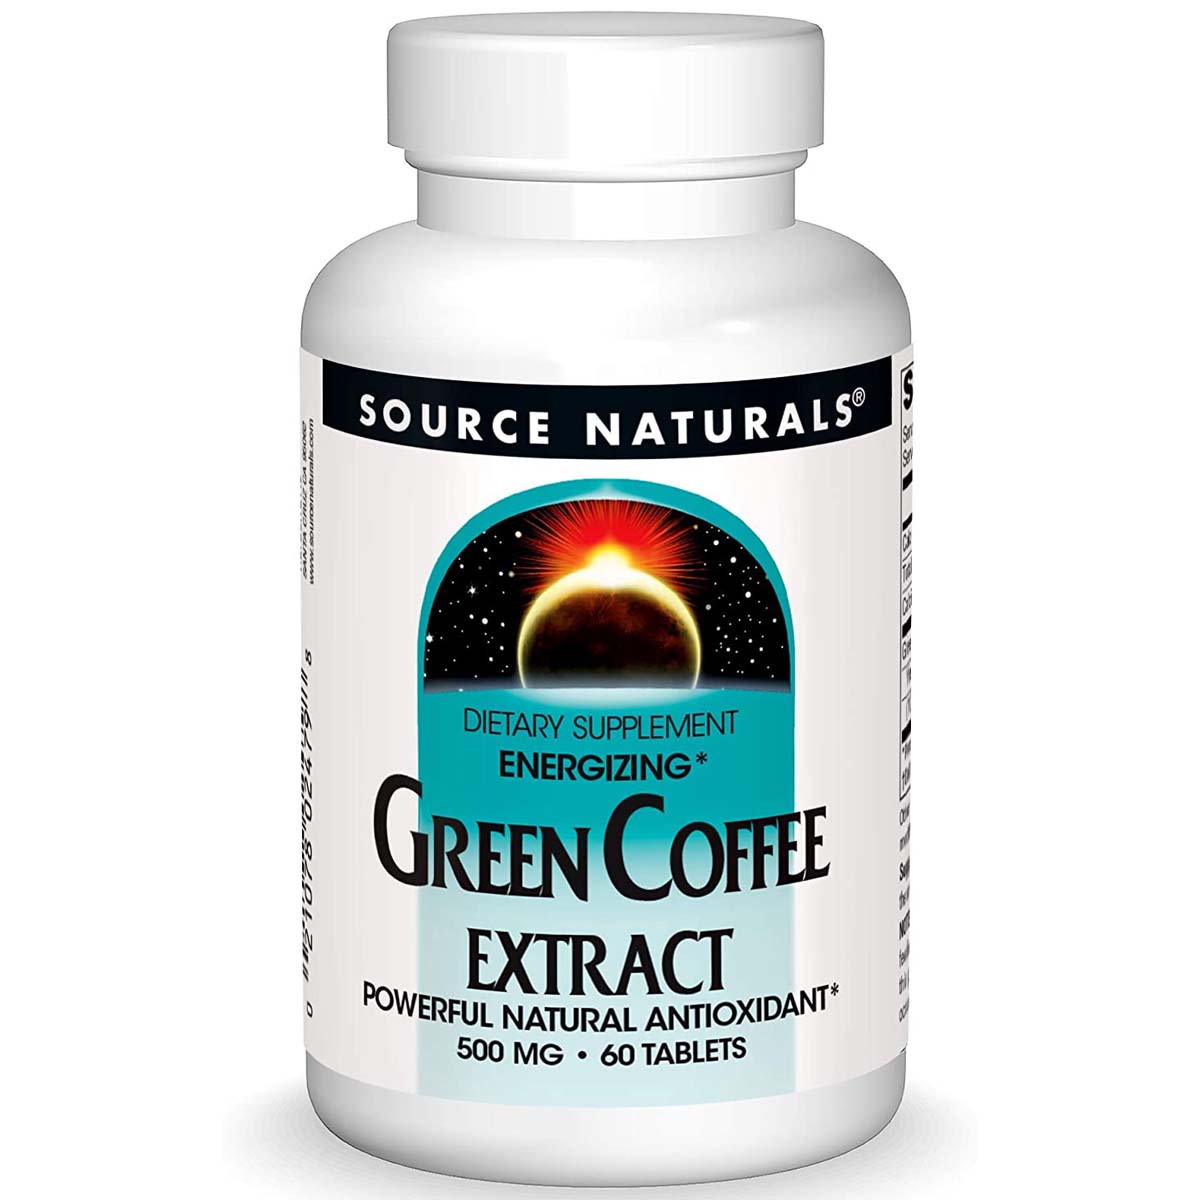 Source Naturals Green Coffee Extract, 500 mg, 60 Tablets